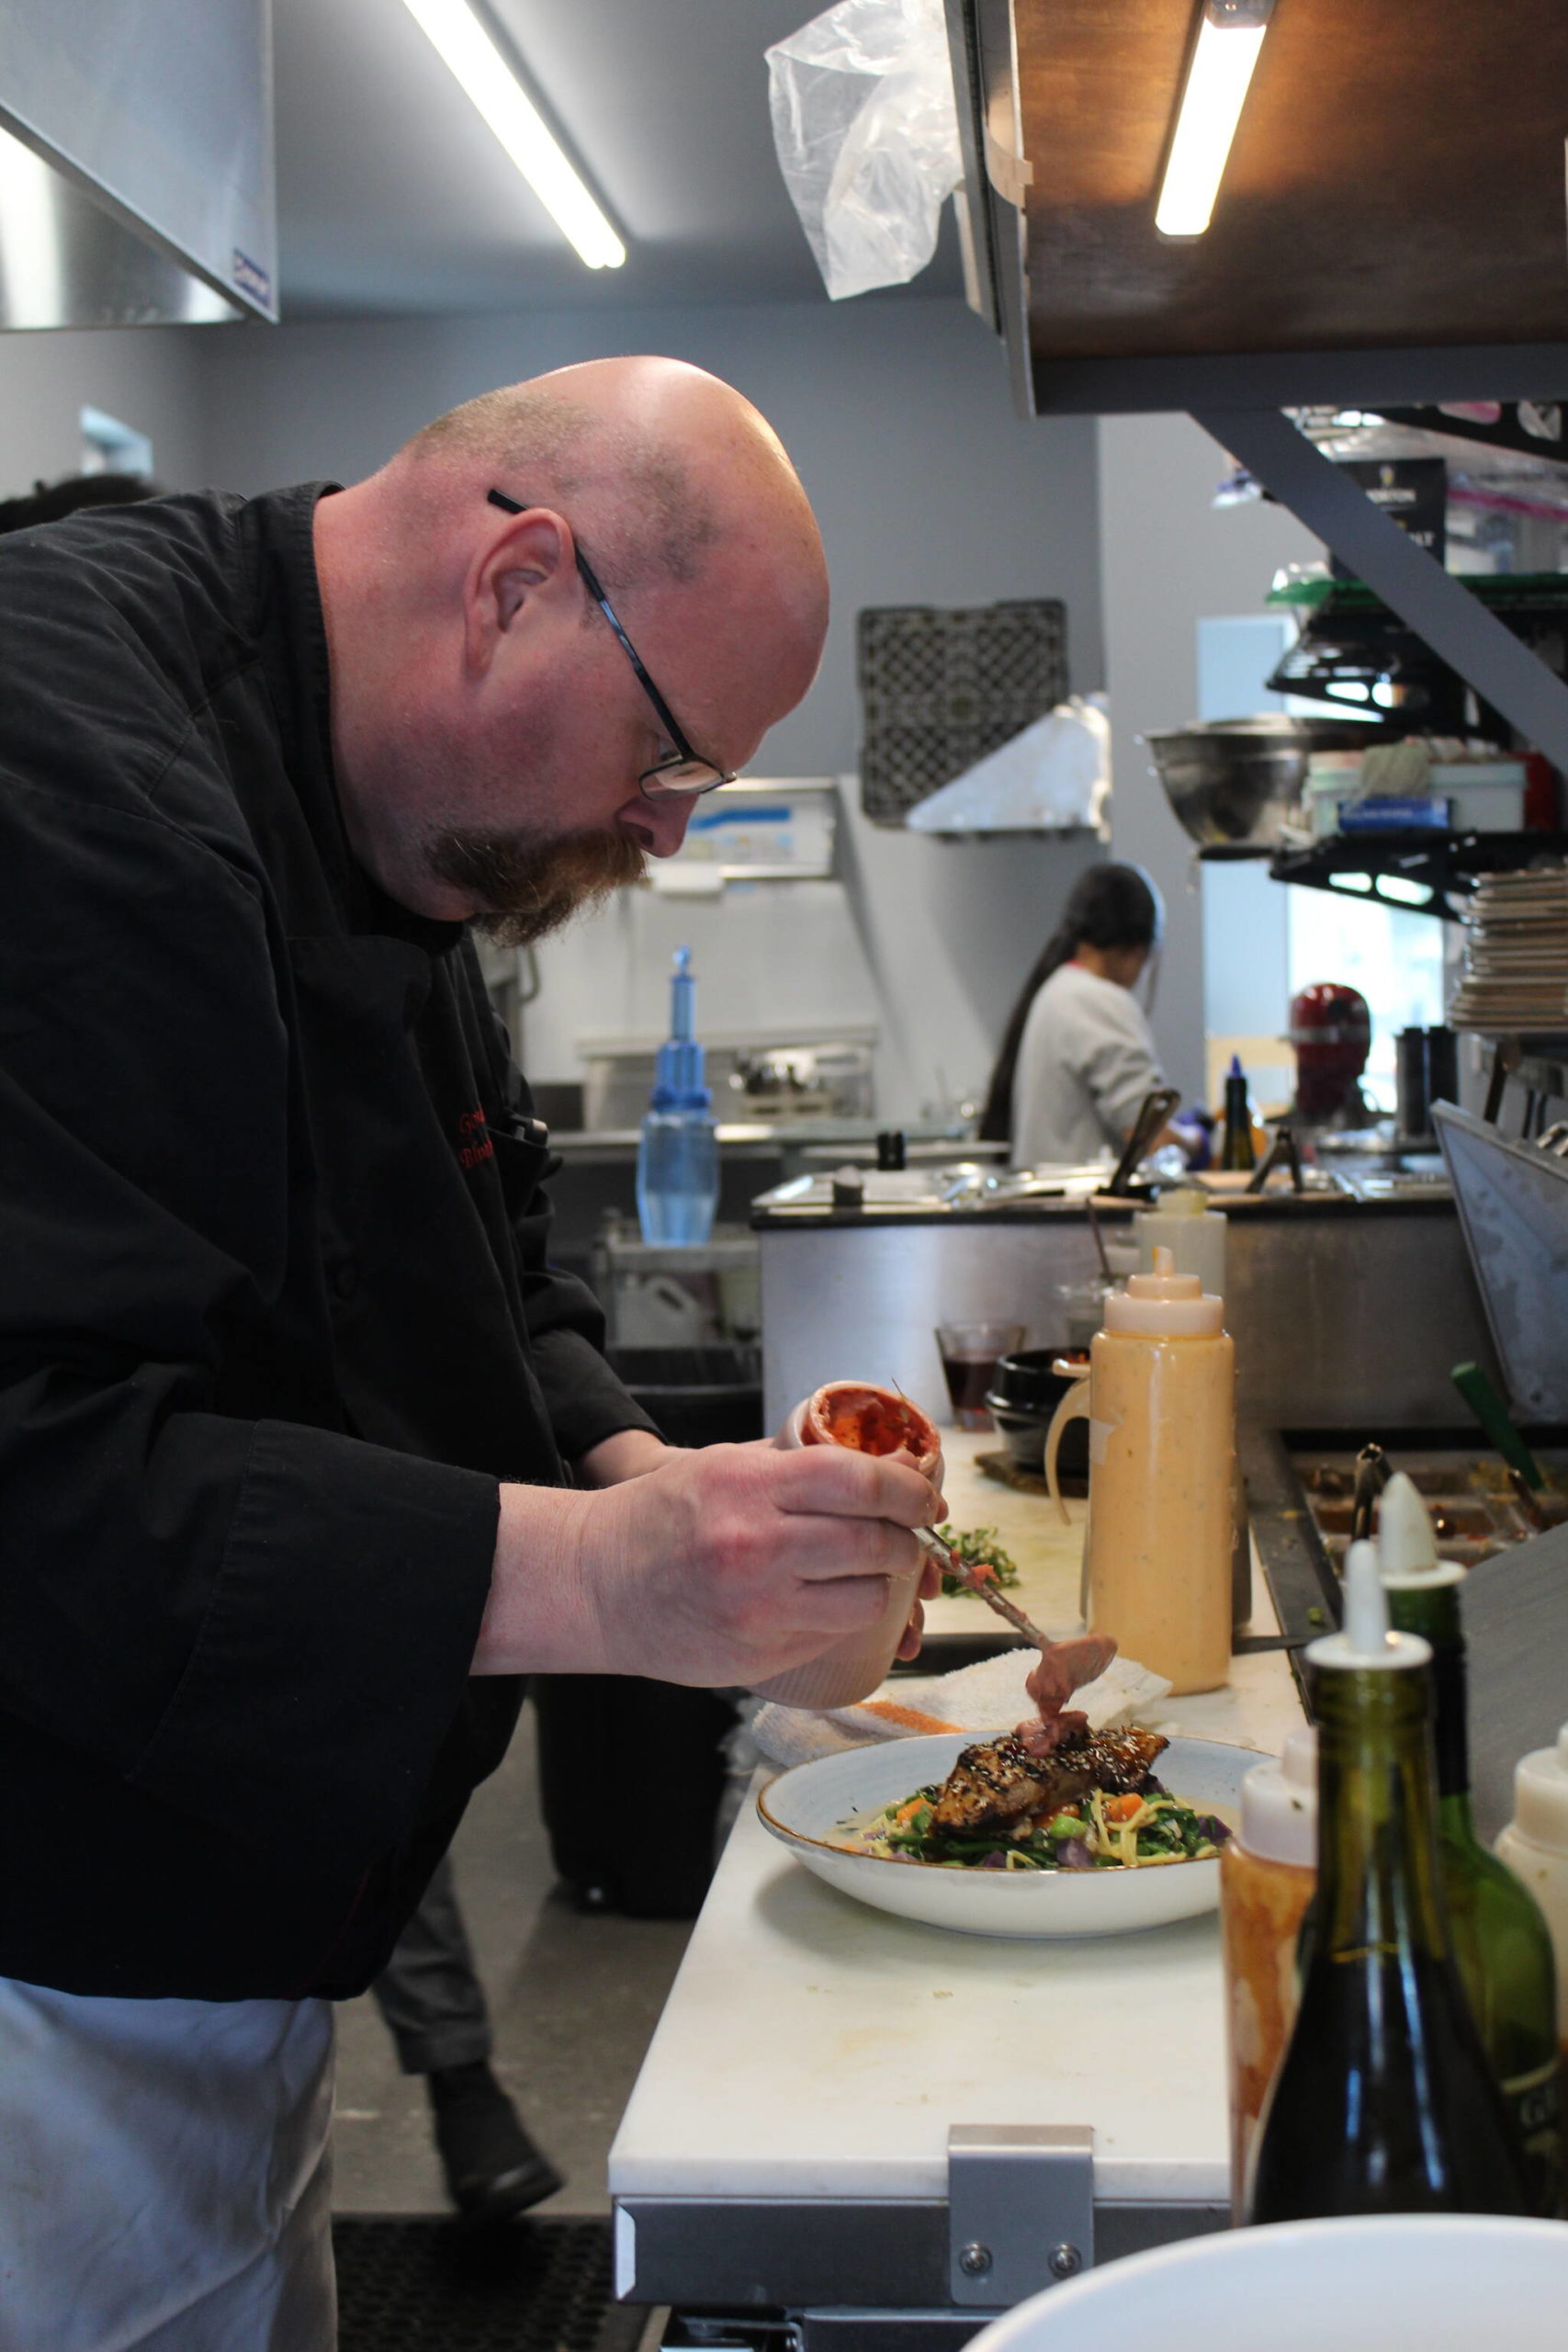 Gordon Stewart prepares a meal at Gordon’s Fusion July 8. (Photo by Karina Andrew/Whidbey News-Times)